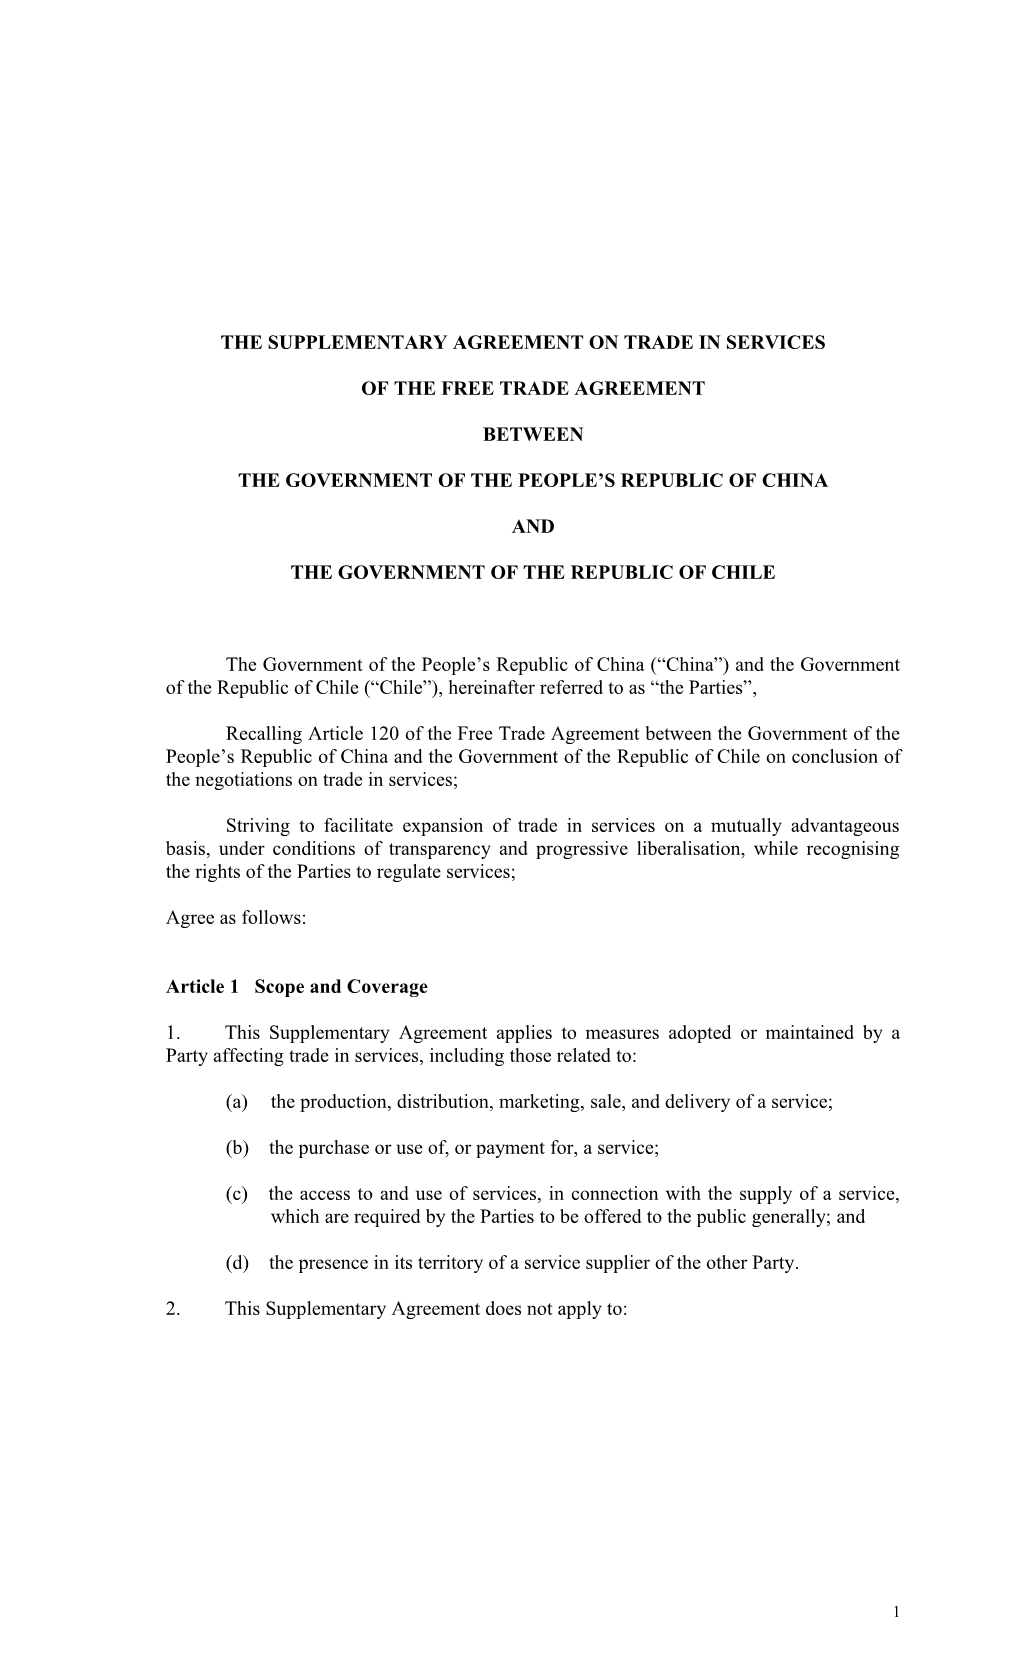 The Supplementary Agreement on Trade in Services